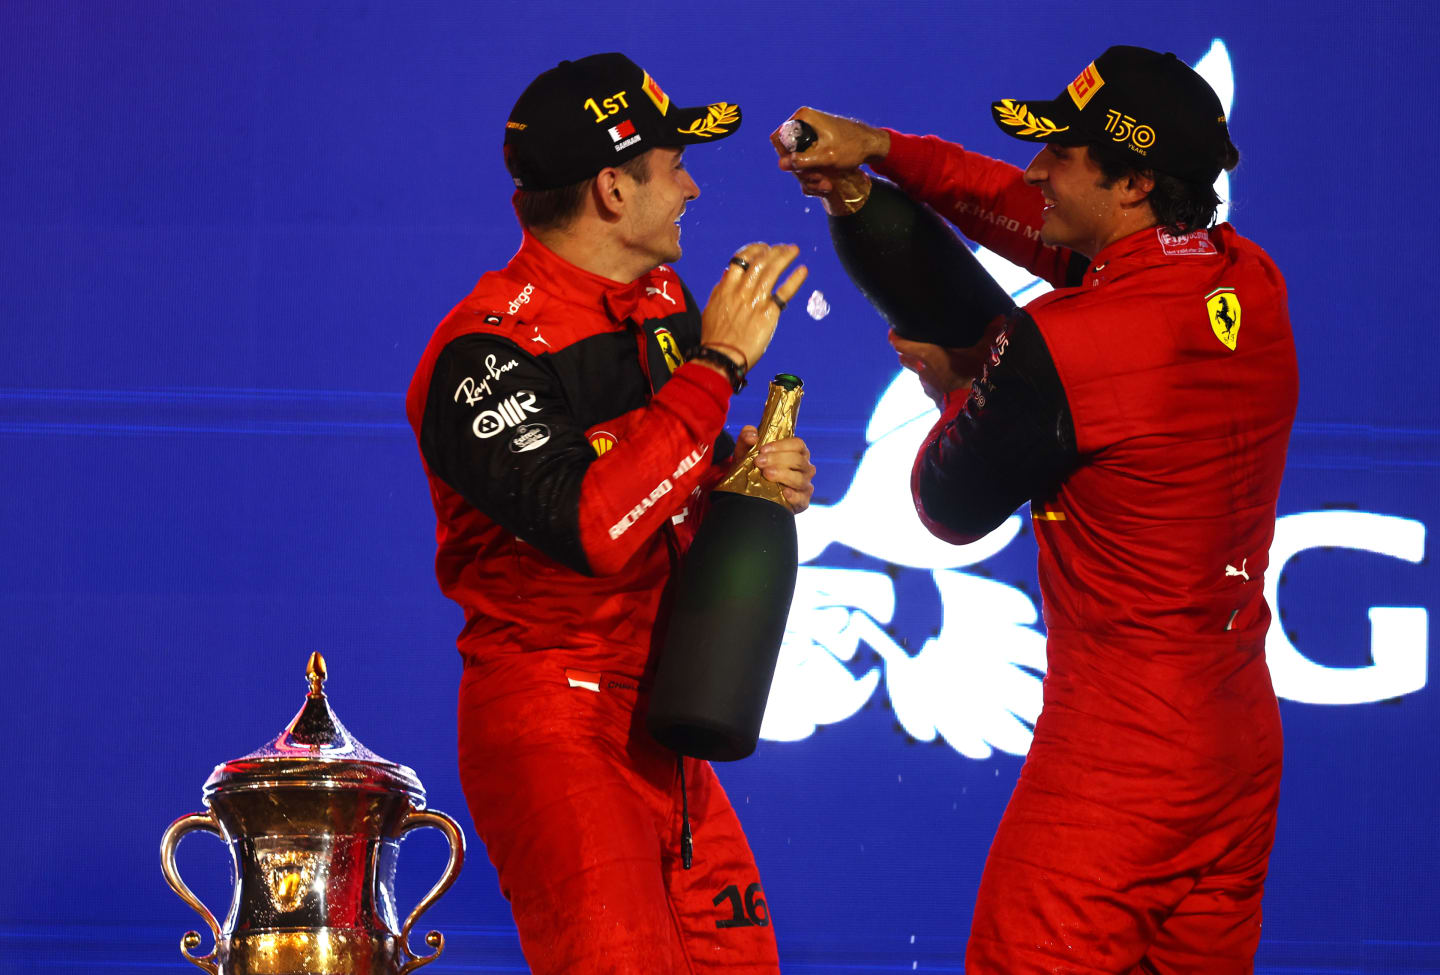 BAHRAIN, BAHRAIN - MARCH 20: Race winner Charles Leclerc of Monaco and Ferrari and Second placed Carlos Sainz of Spain and Ferrari celebrate on the podium during the F1 Grand Prix of Bahrain at Bahrain International Circuit on March 20, 2022 in Bahrain, Bahrain. (Photo by Lars Baron/Getty Images)